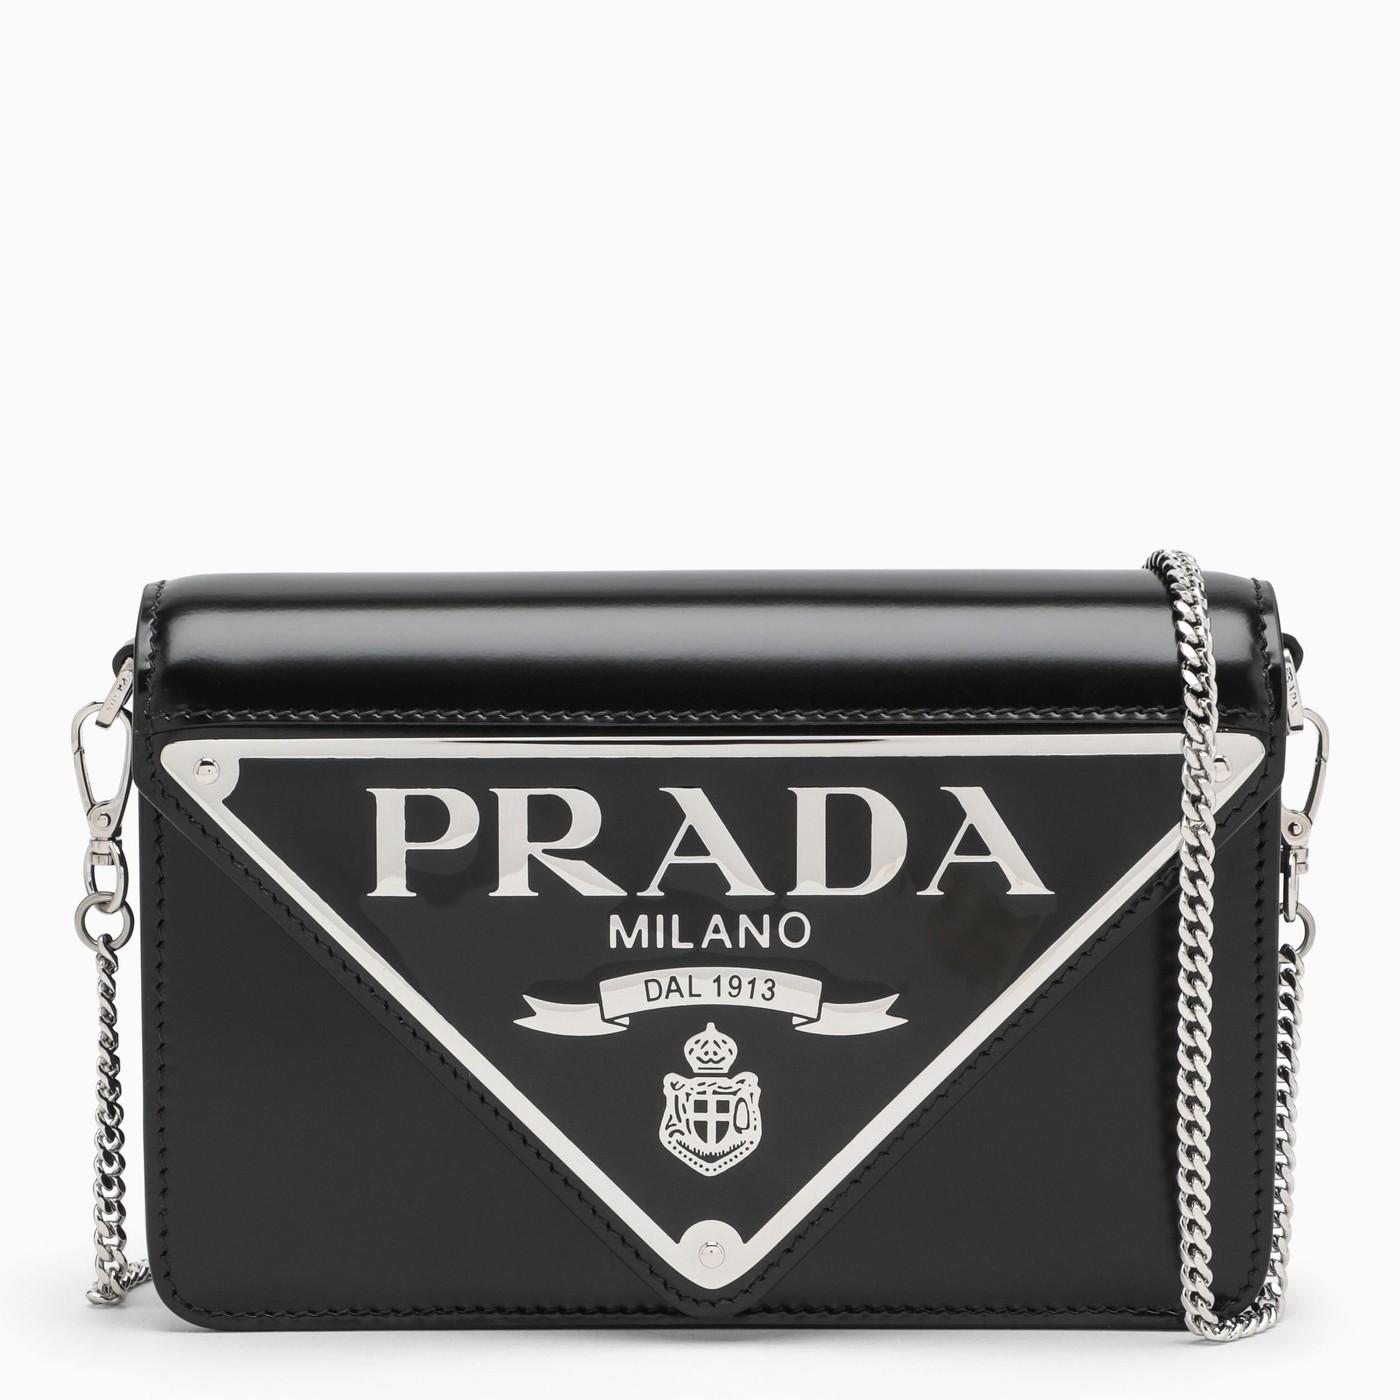 Prada Cleo Shoulder Bag Silver in Brushed Leather with Silver-tone